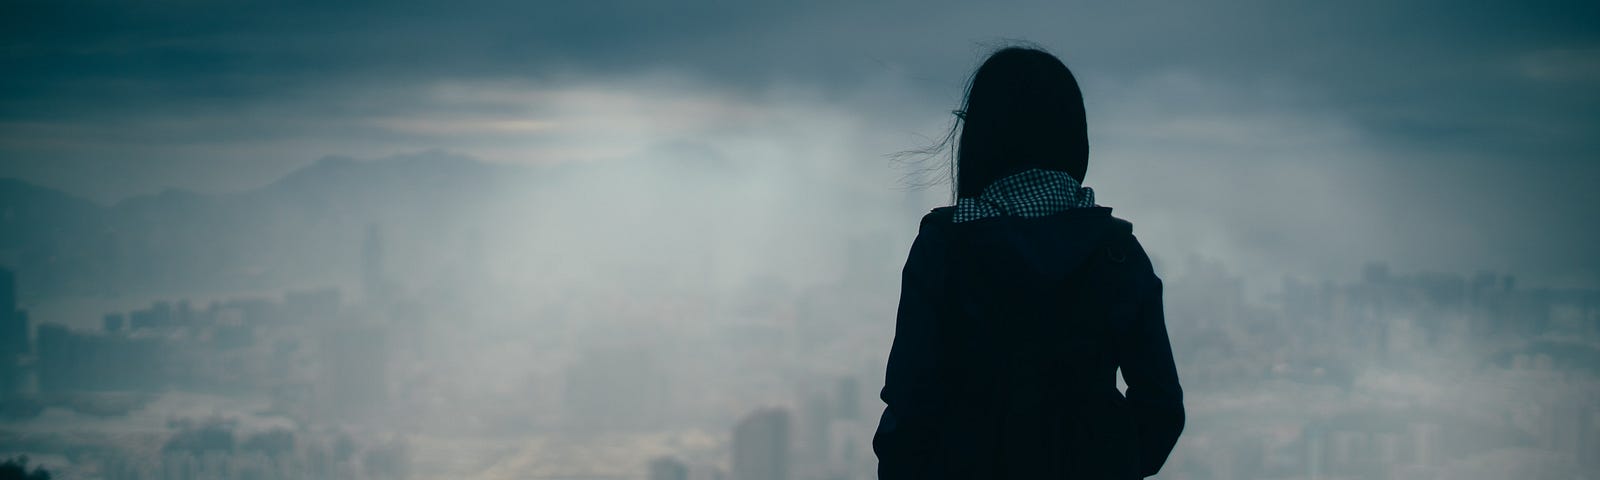 Silouette of woman standing on a hill looking at bleak landscape.